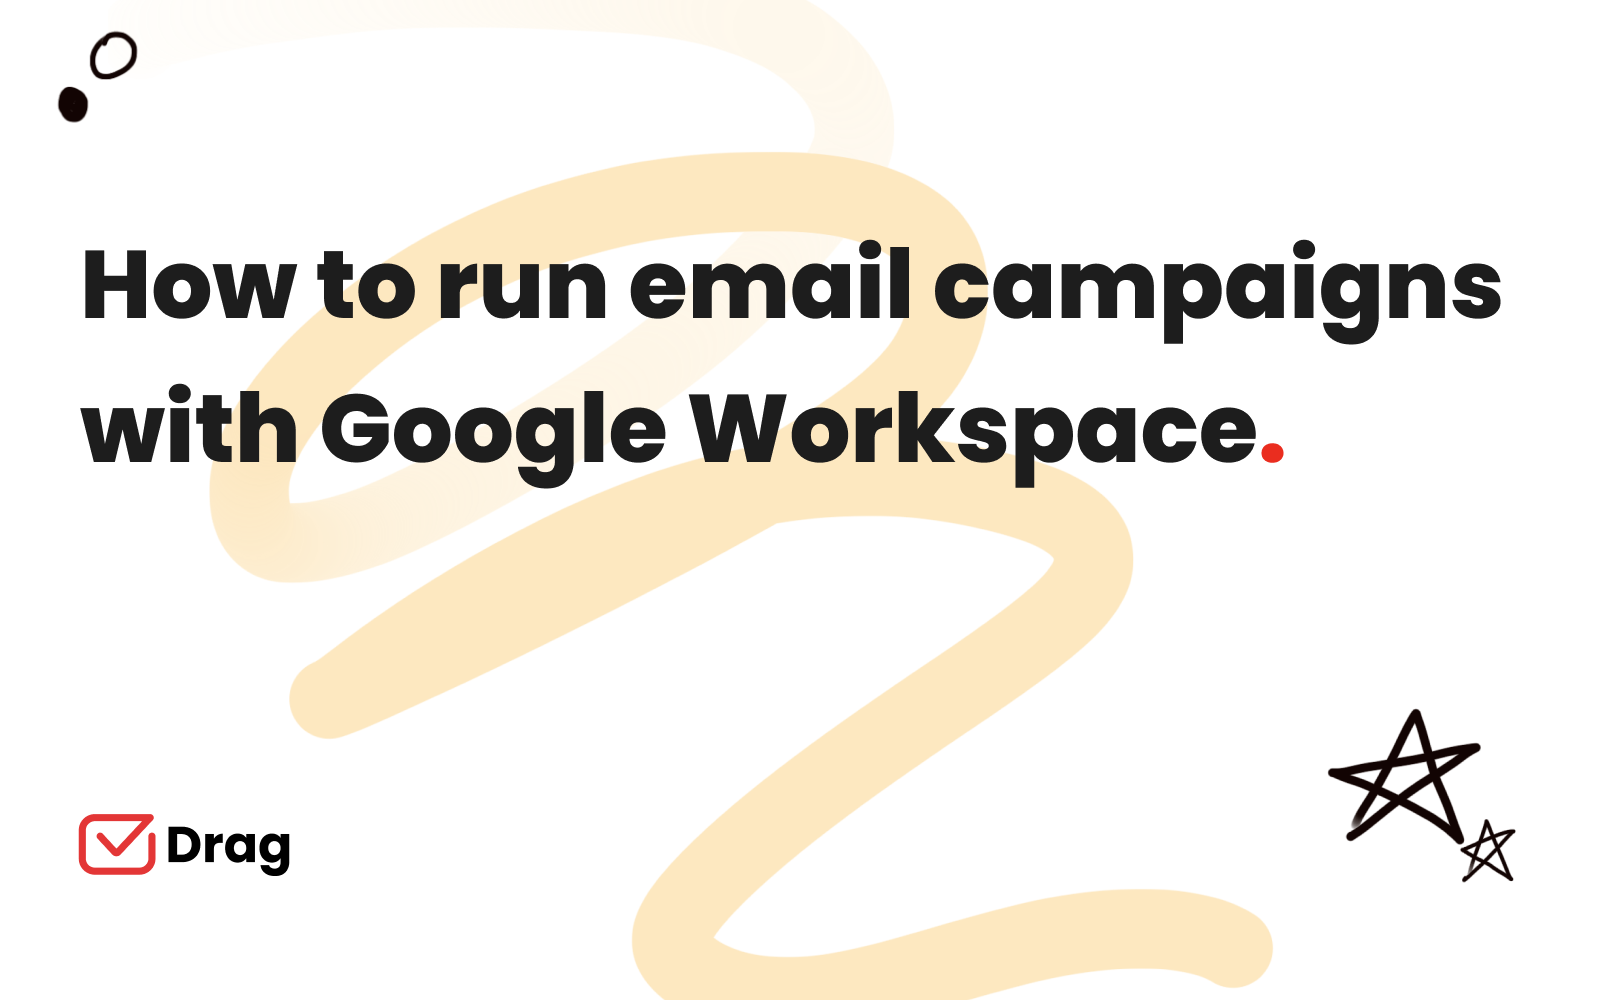 how to run email campaigns with google workspace